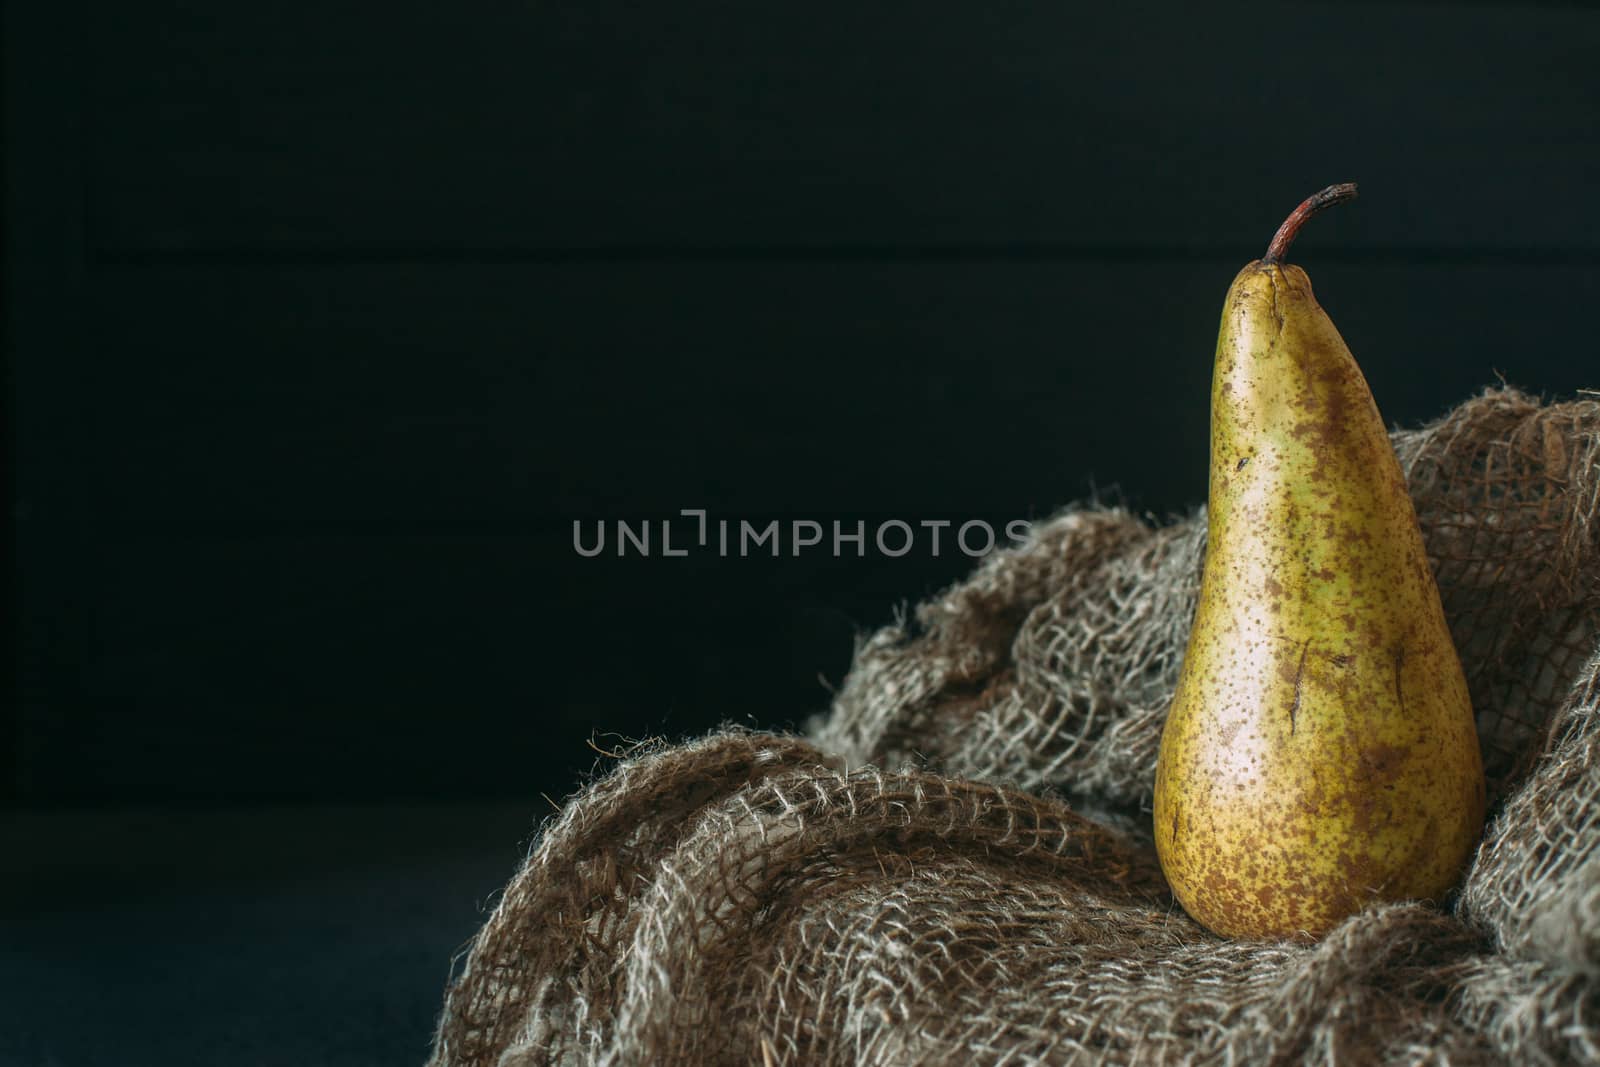 Still life with a pear standing on burlap on a dark wooden backg by Opikanets